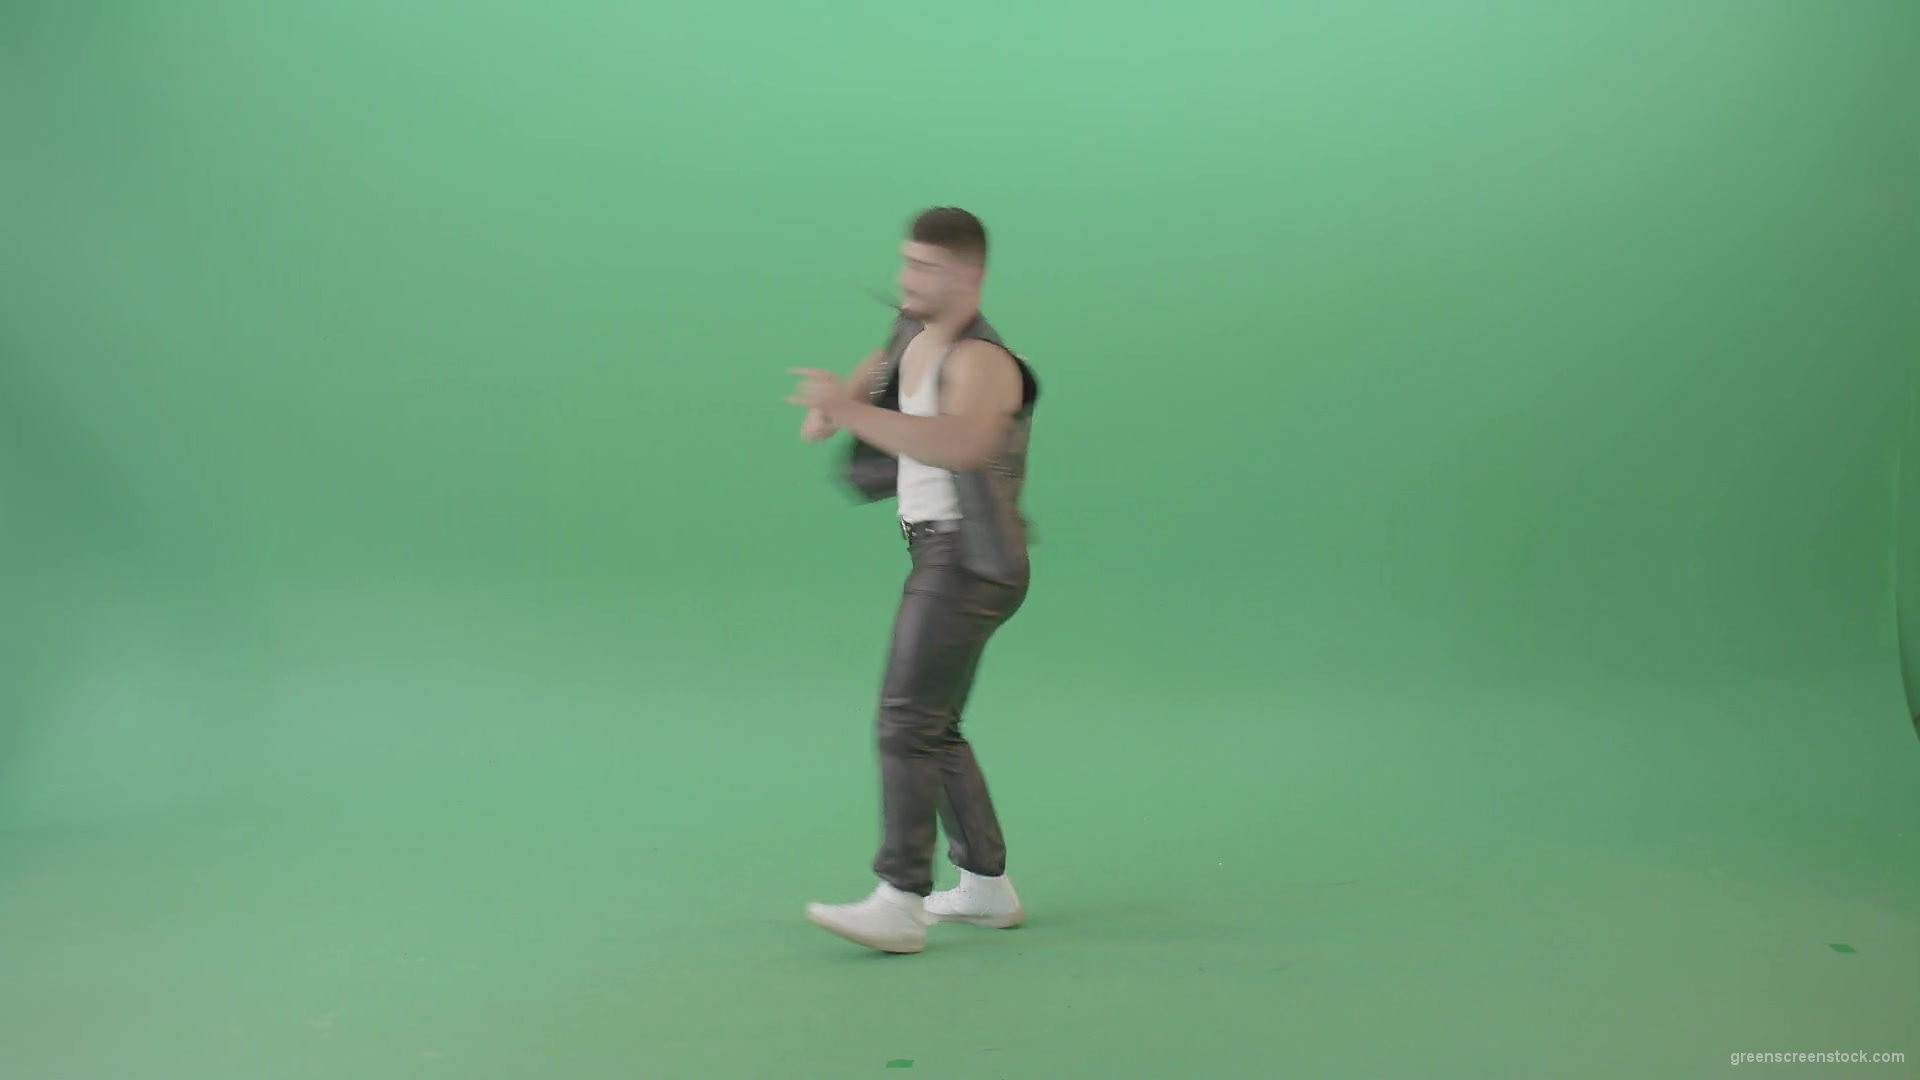 Angry-caucasian-Man-in-Black-leather-costume-dancing-Pop-Moves-on-Green-Screen-4K-Video-Footage-1920_005 Green Screen Stock